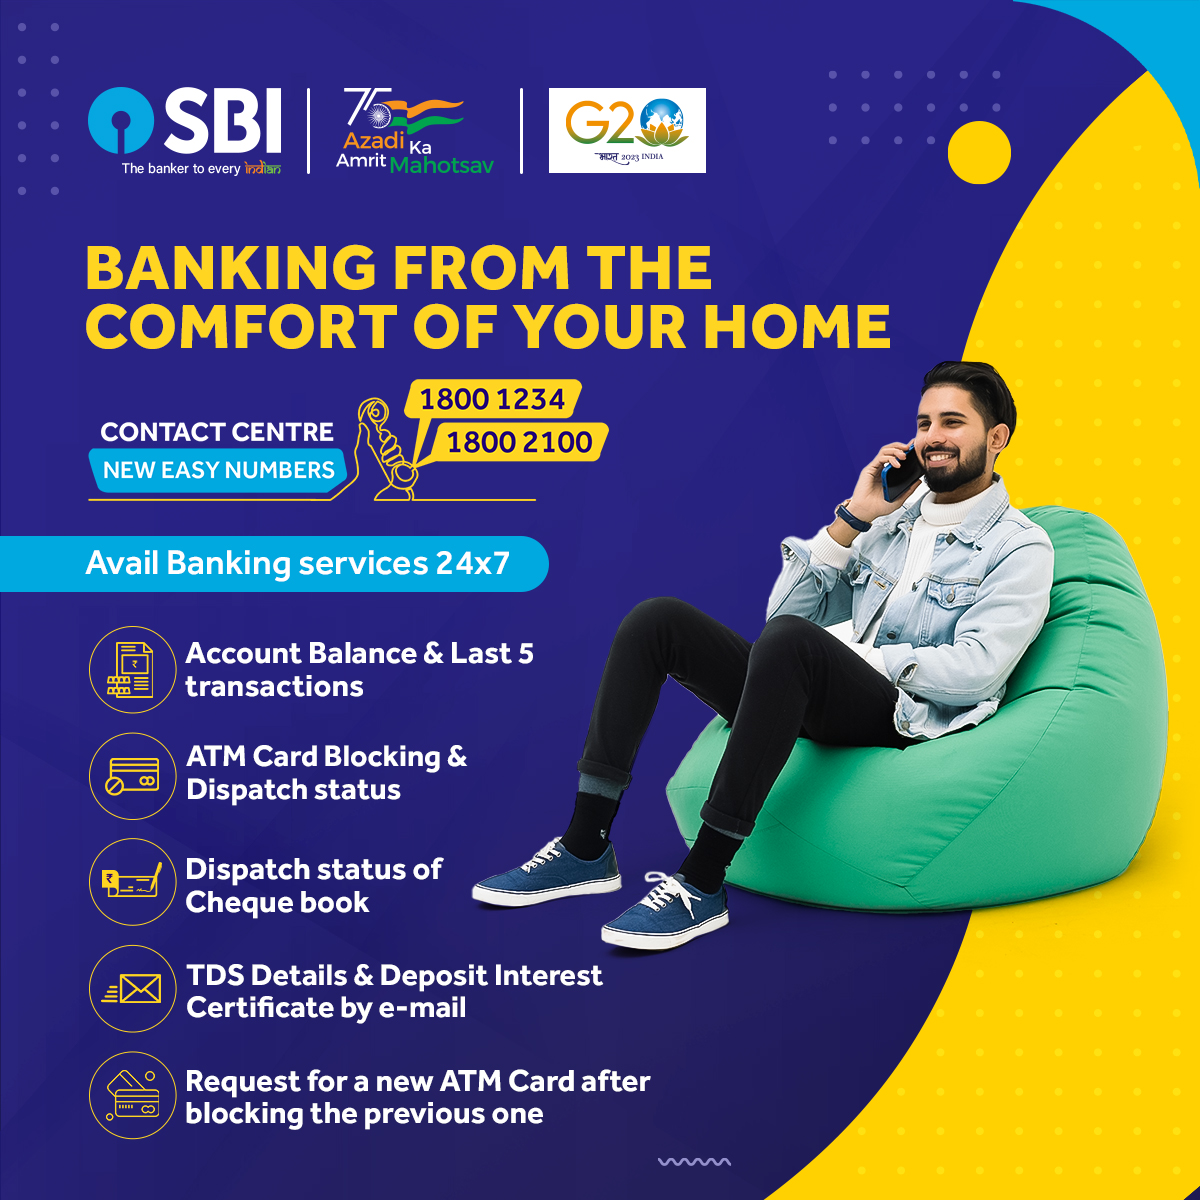 Why go to the branch when you can just call? 

Call SBI Contact Centre toll-free at 1800 1234 or 1800 2100.

#SBI #SBIContactCentre #AmritMahotsav #AzadiKaAmritMahotsavWithSBI